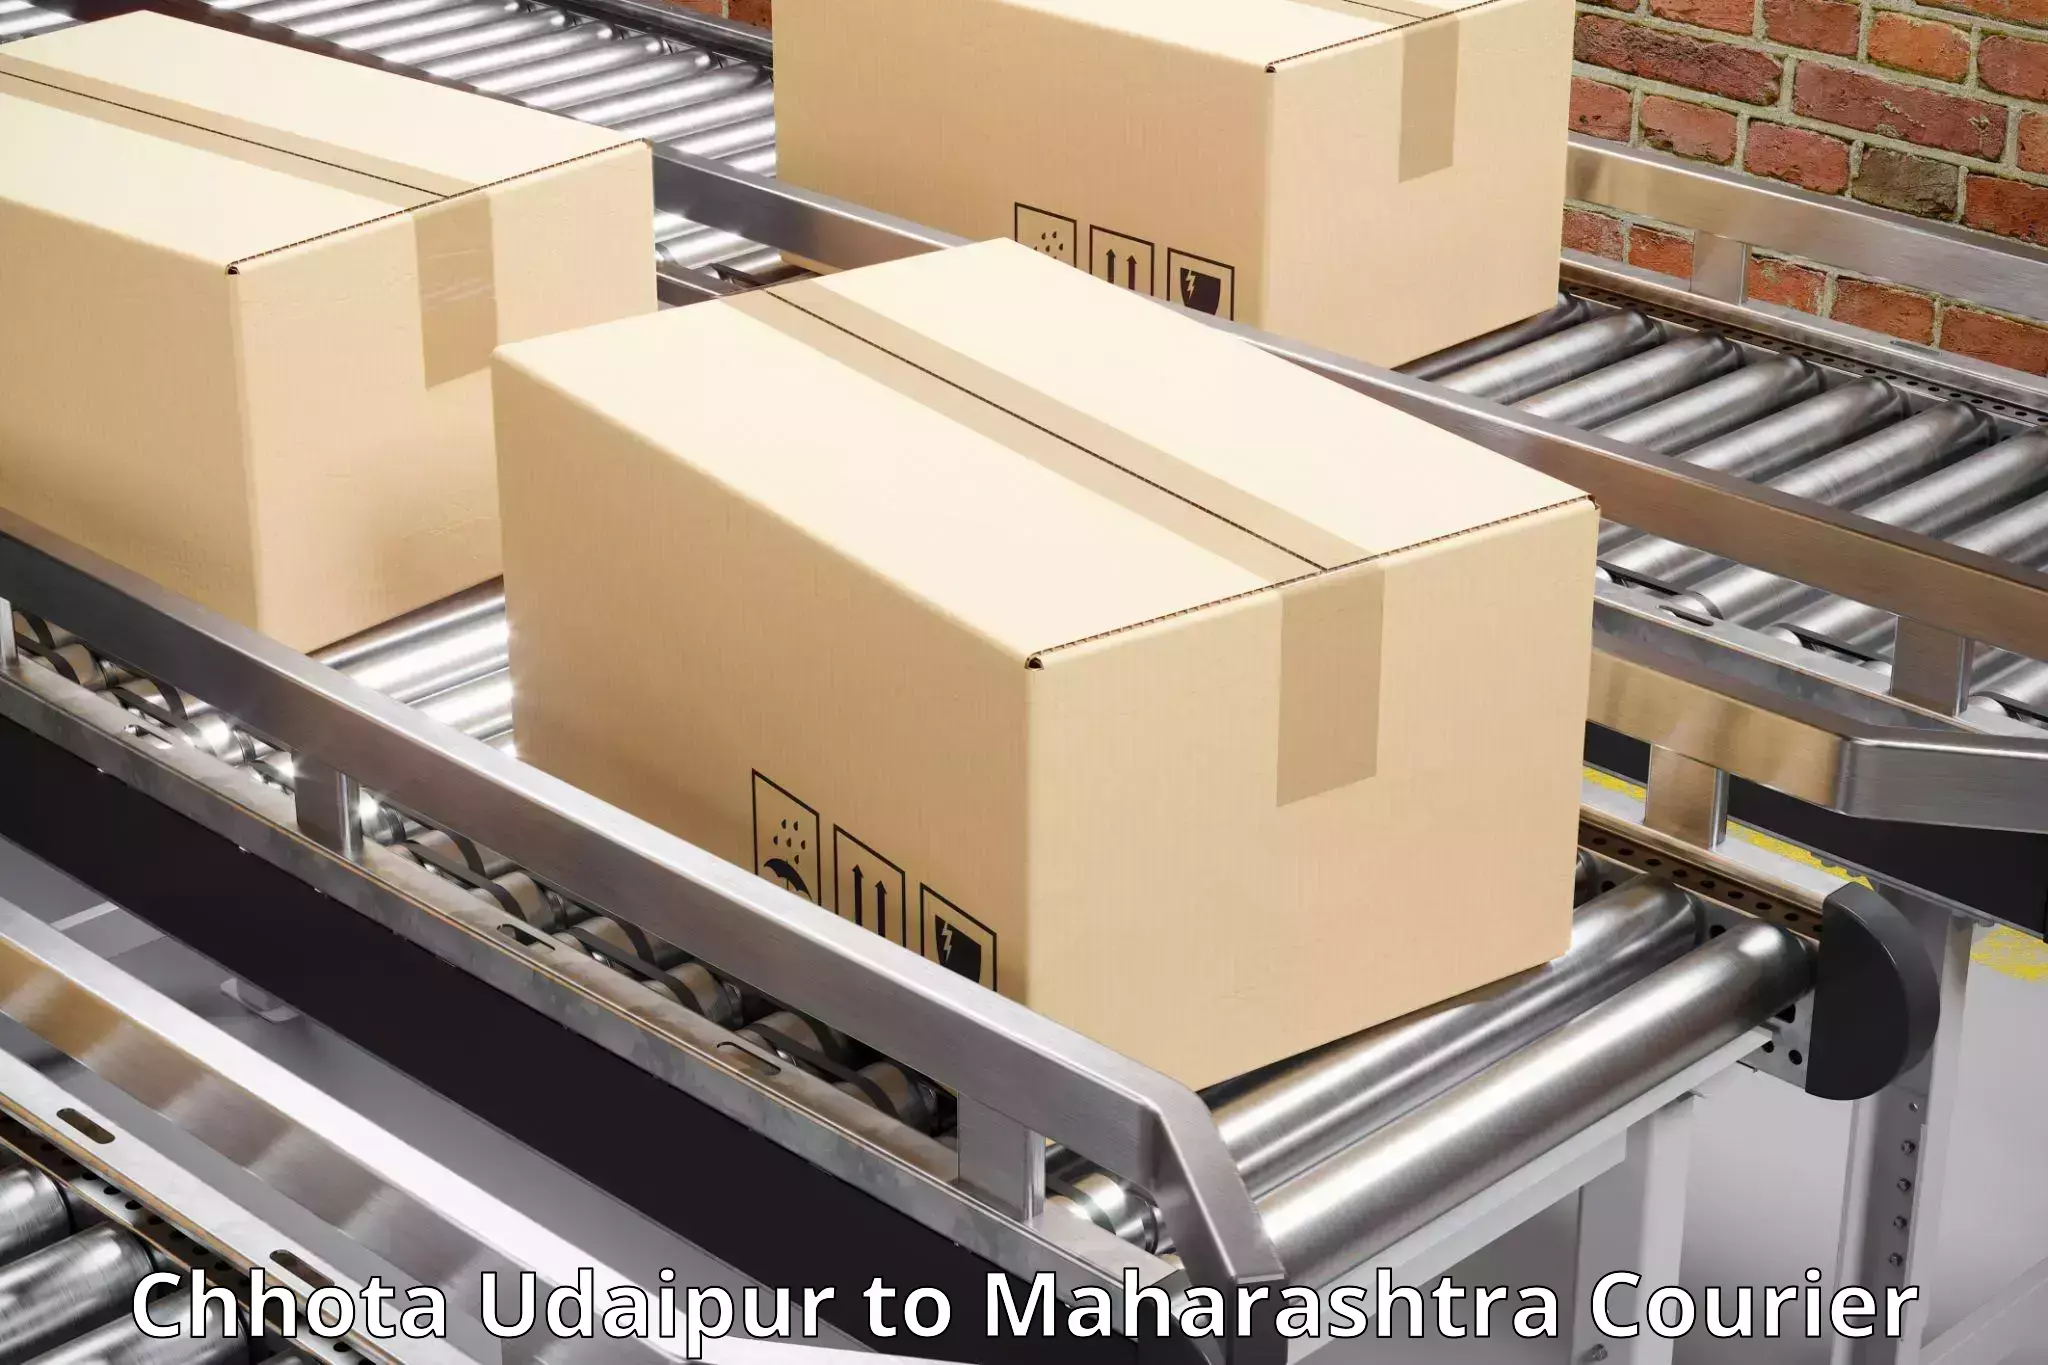 Easy access courier services Chhota Udaipur to Barshi